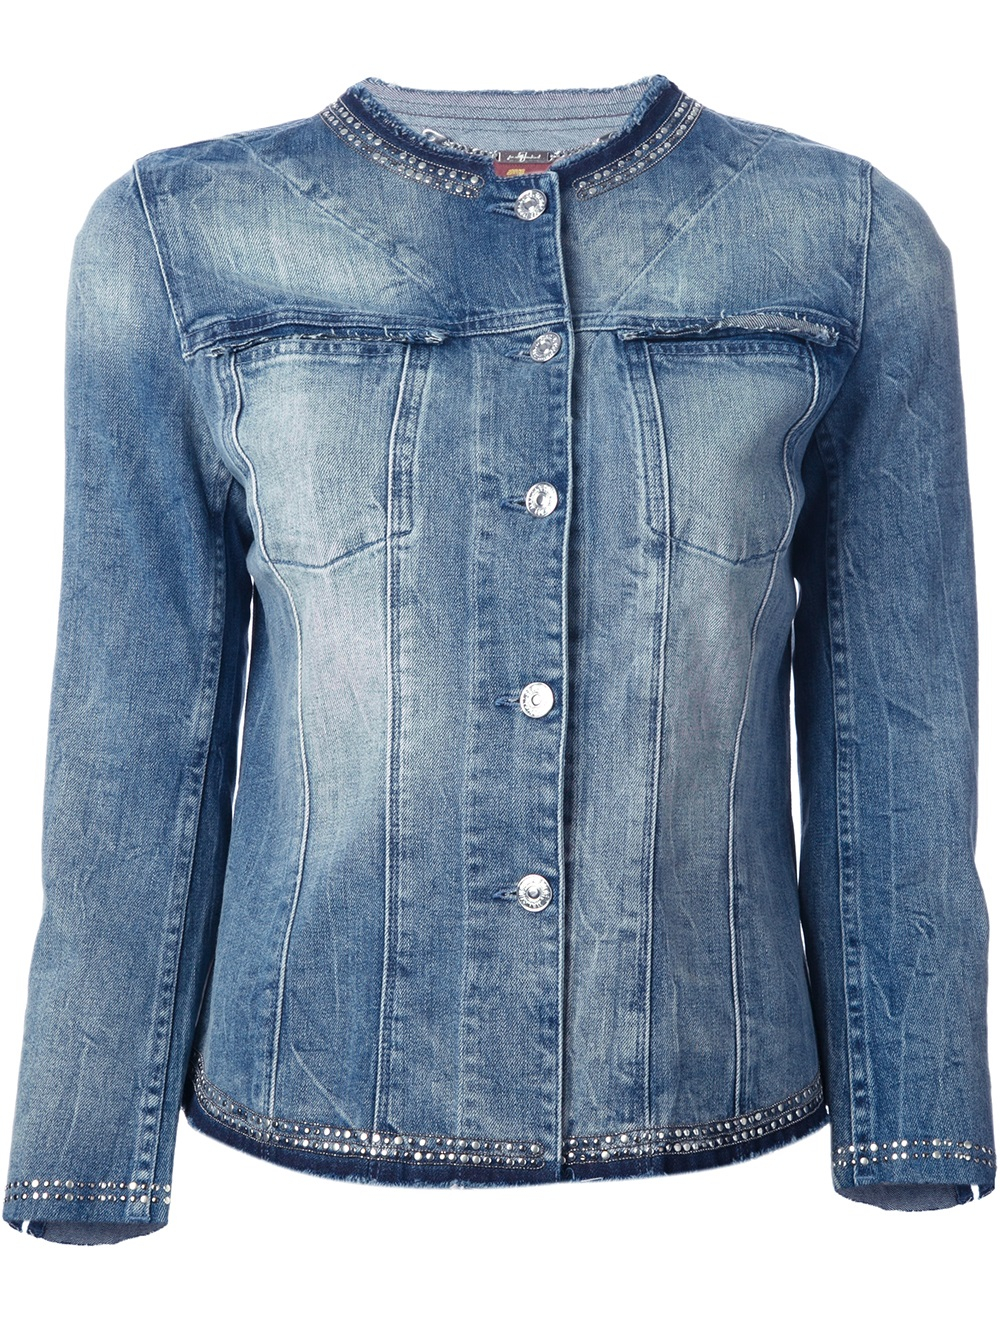 7 For All Mankind Studded Collarless Denim Jacket in Blue | Lyst